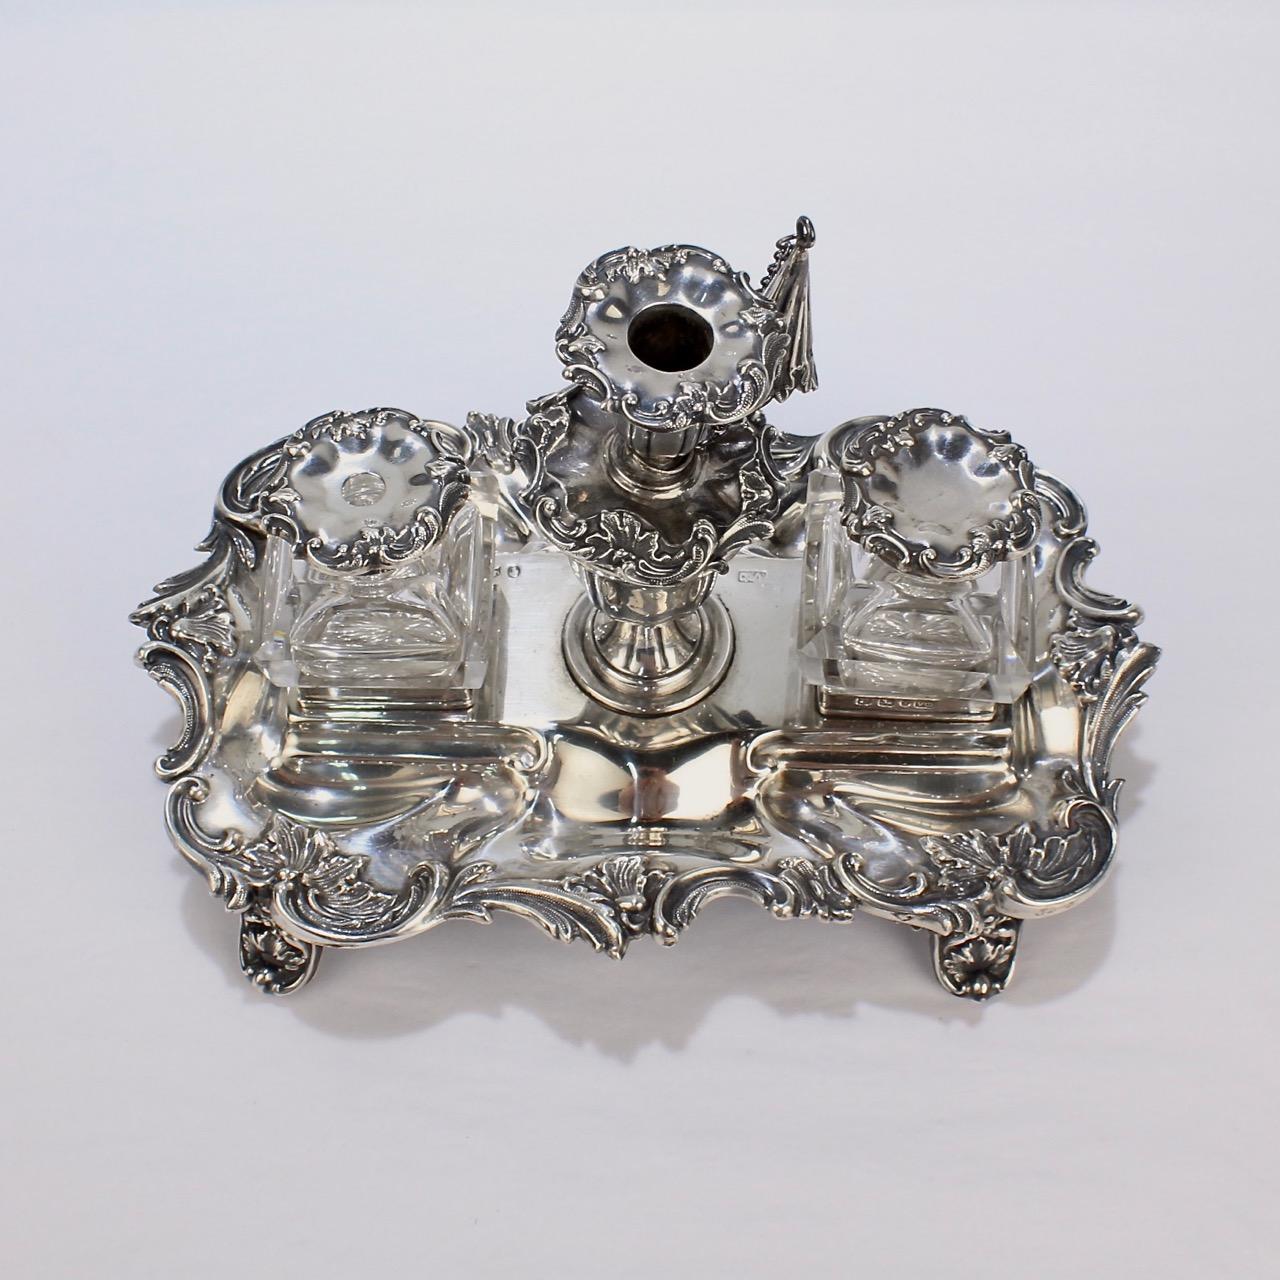 Exceptional Early Victorian English Sterling Silver Inkstand by Henry Wilkinson For Sale 1